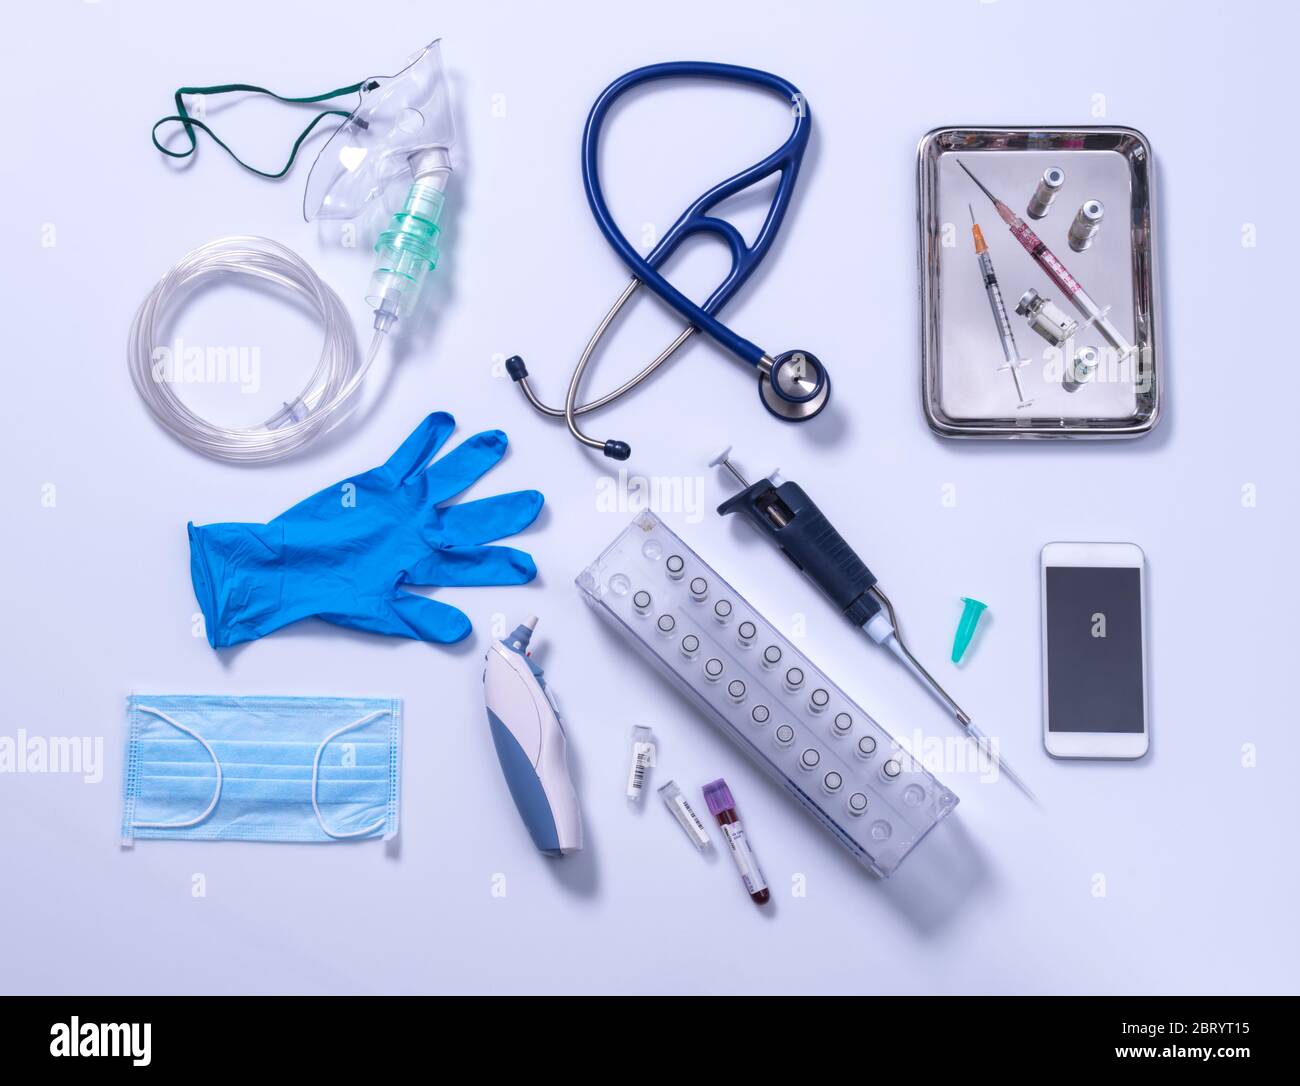 Potential way out of lockdown stage. Medical equipment on a grey background, oxygen mask, stethoscope, mobile phone with a contact tracing app, syringes for vaccine, blue gloves and digital thermometer. Stock Photo